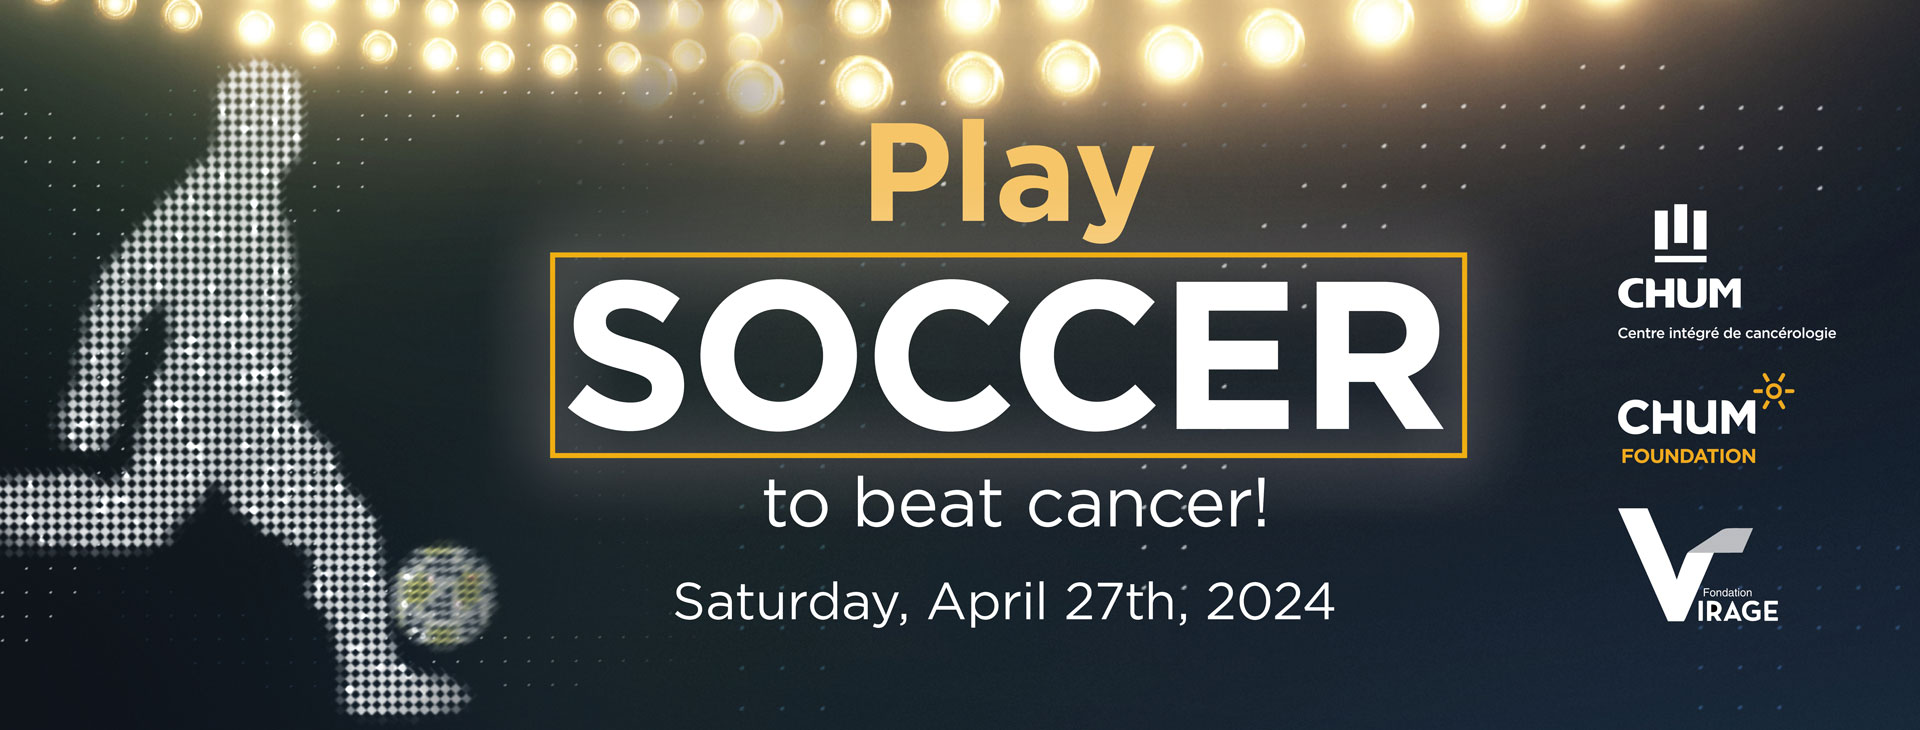 Play soccer to beat cancer